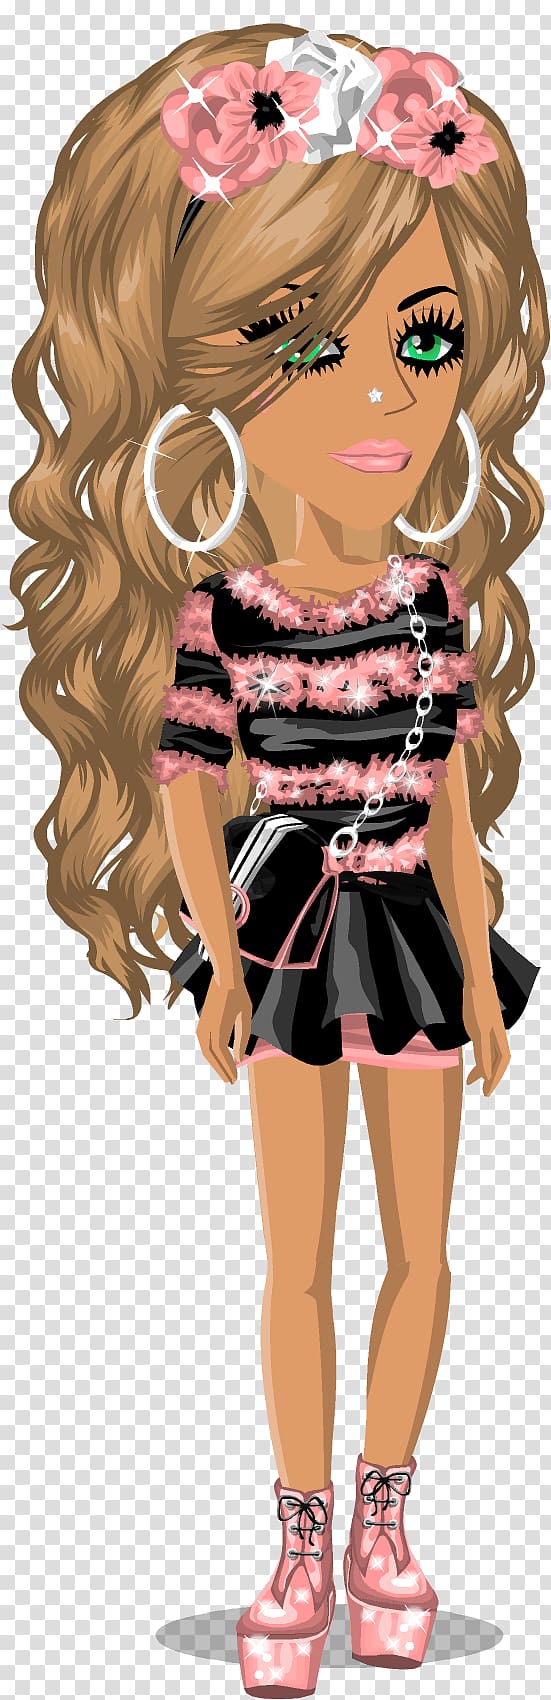 MovieStarPlanet Character Avatar Game, Vip Party christmas transparent background PNG clipart